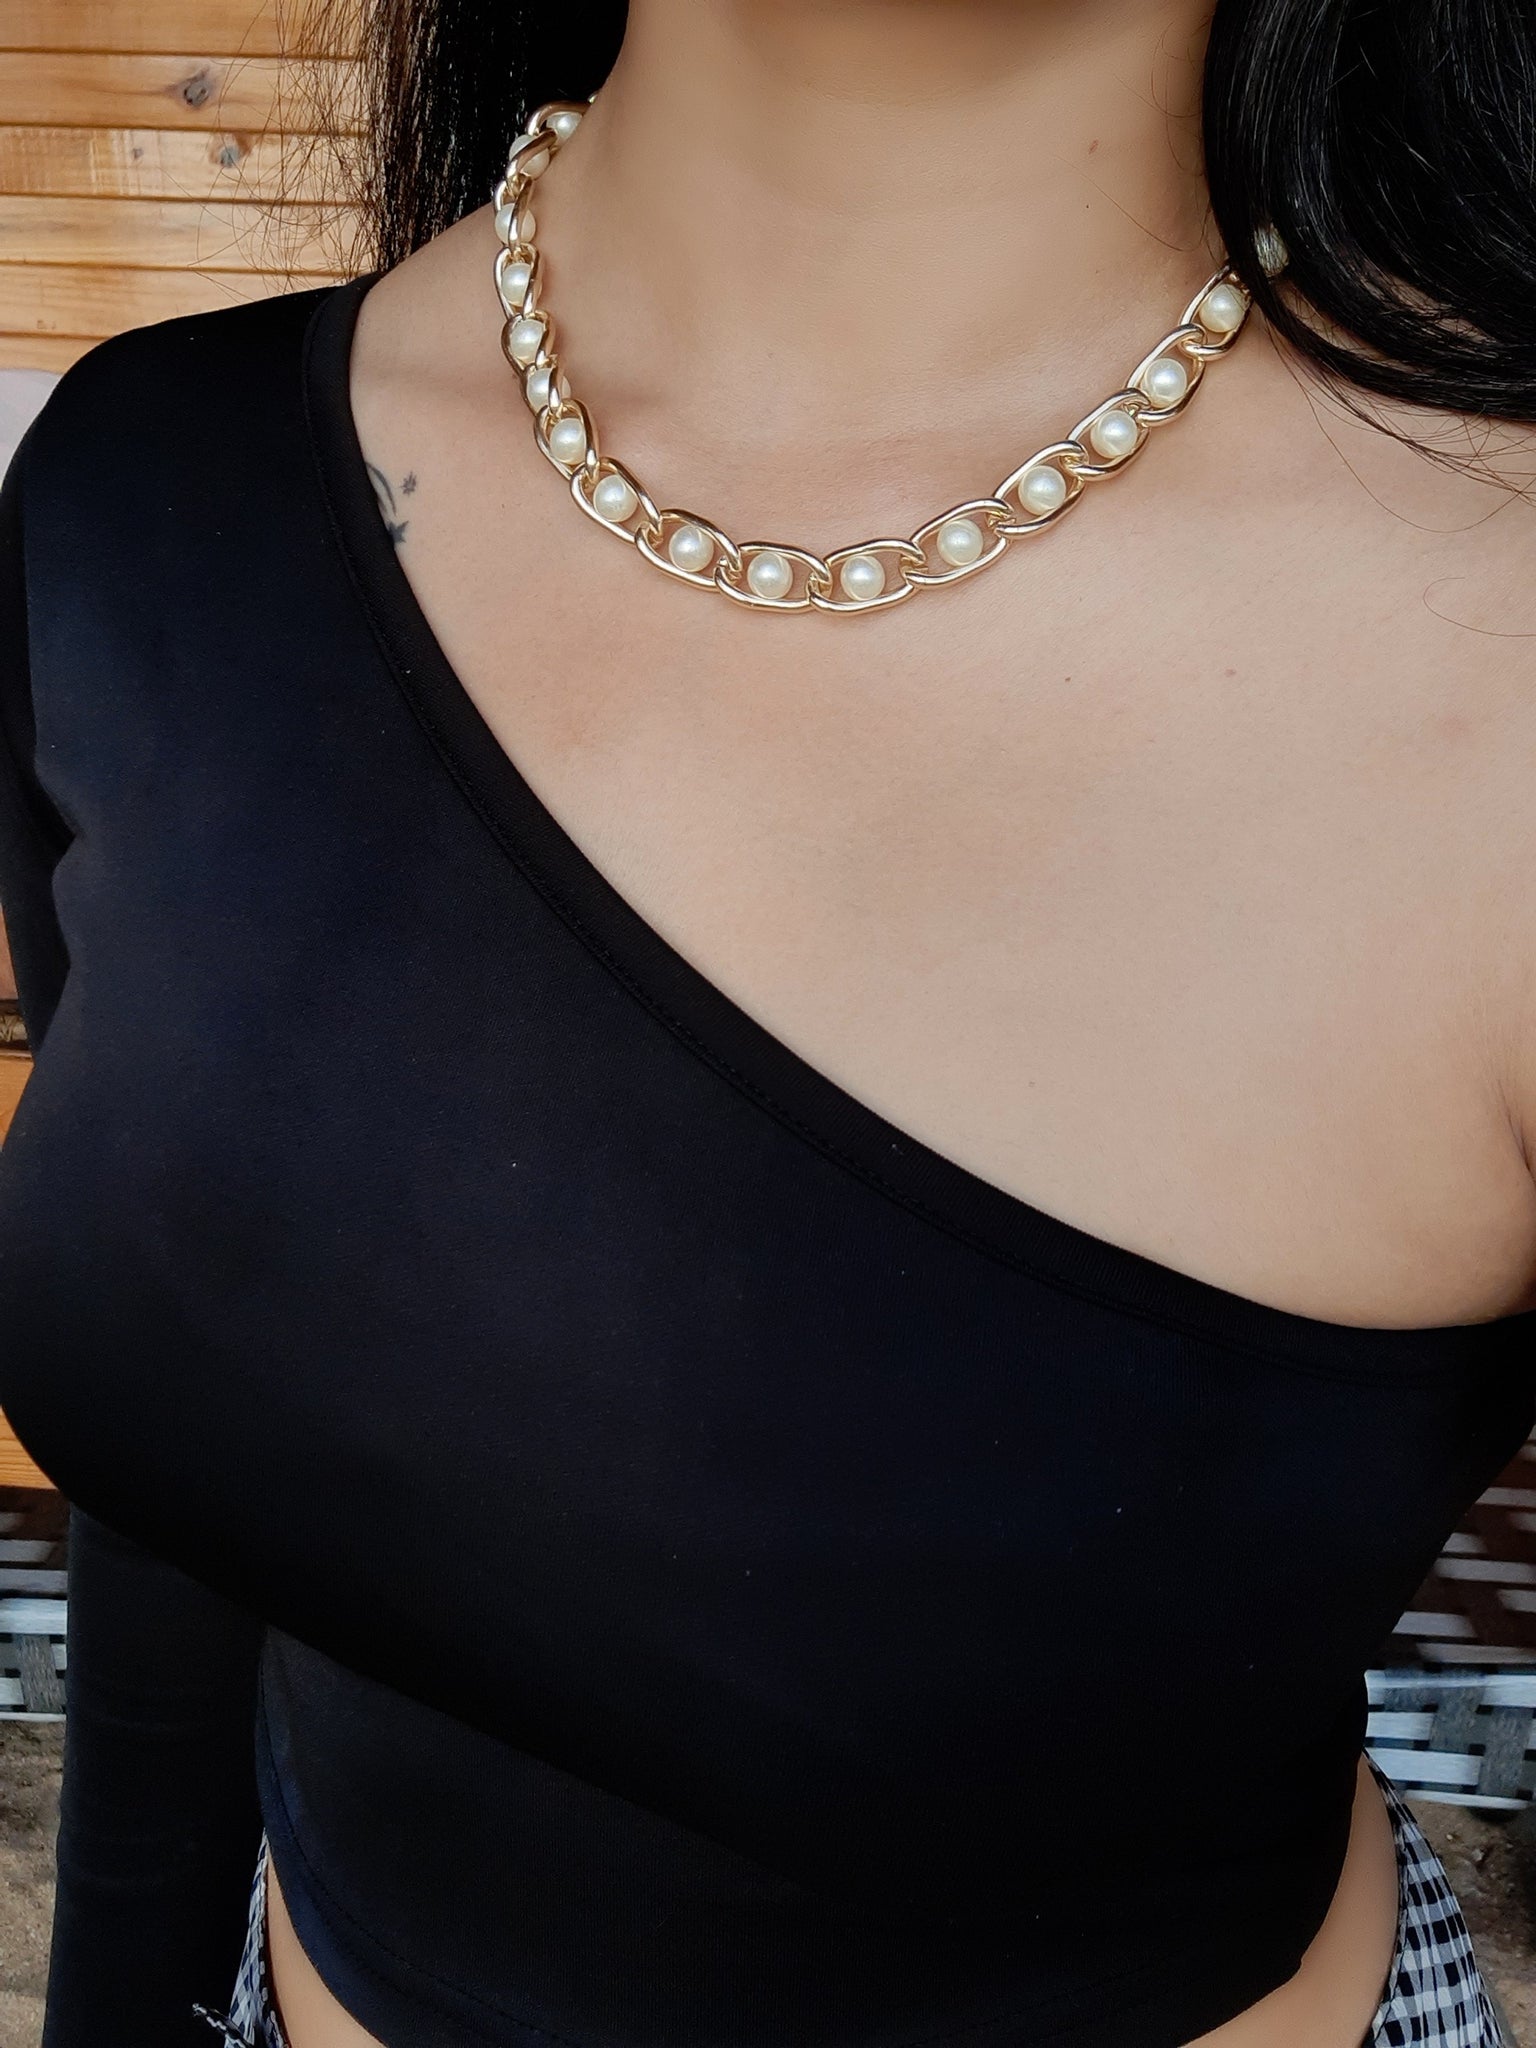 Pearl Chain Necklace for Women | FashionCrab.com